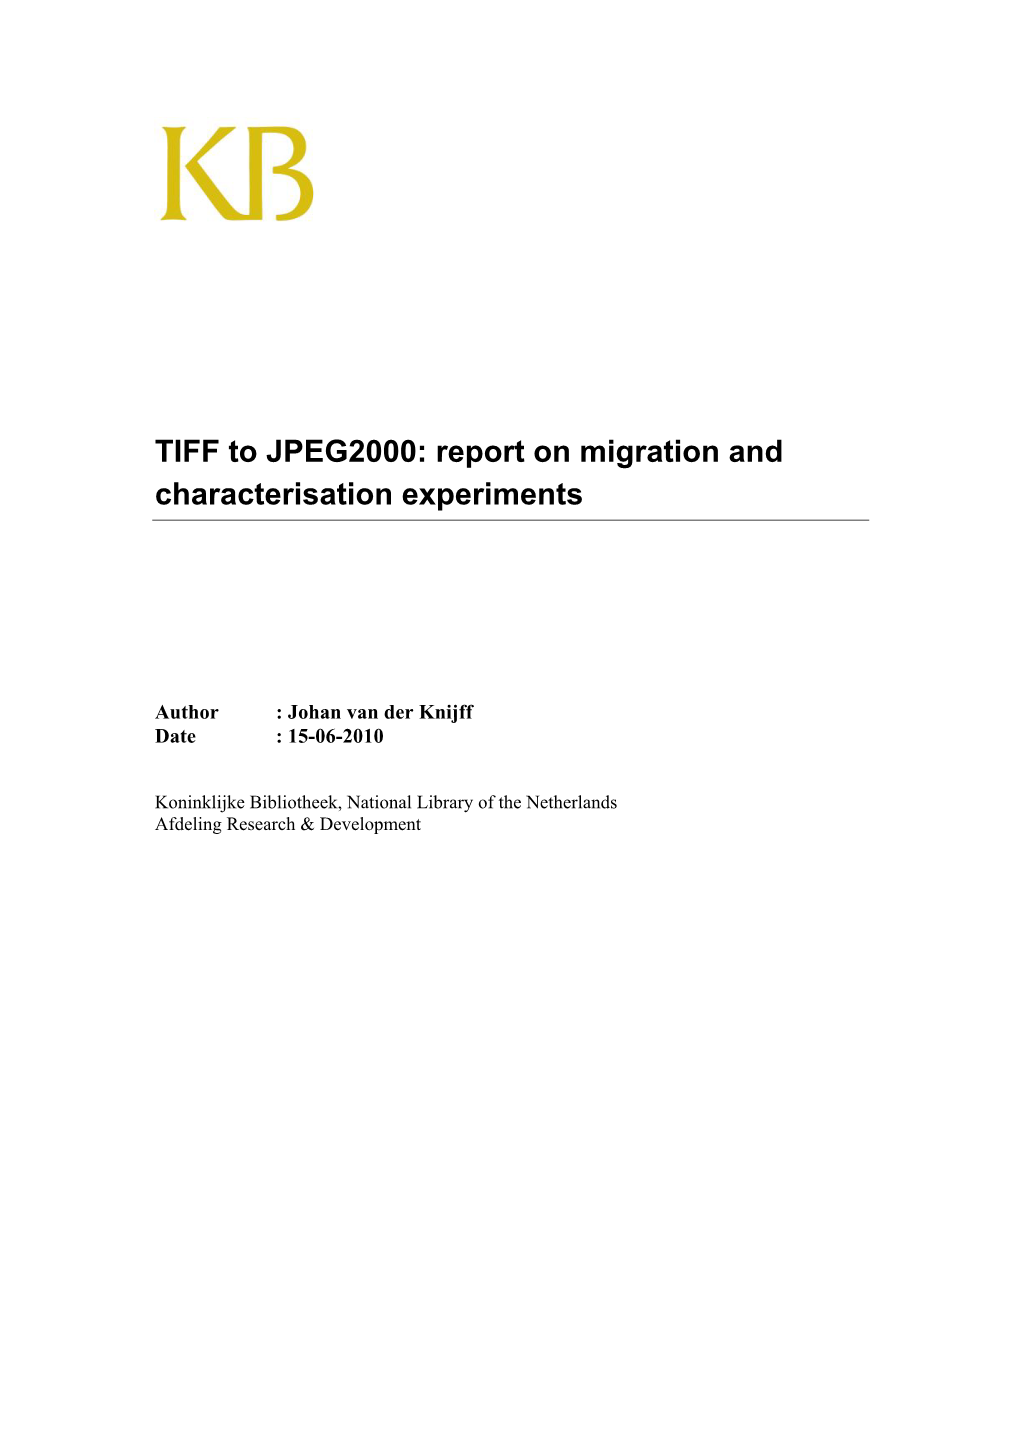 TIFF to JPEG2000: Report on Migration and Characterisation Experiments